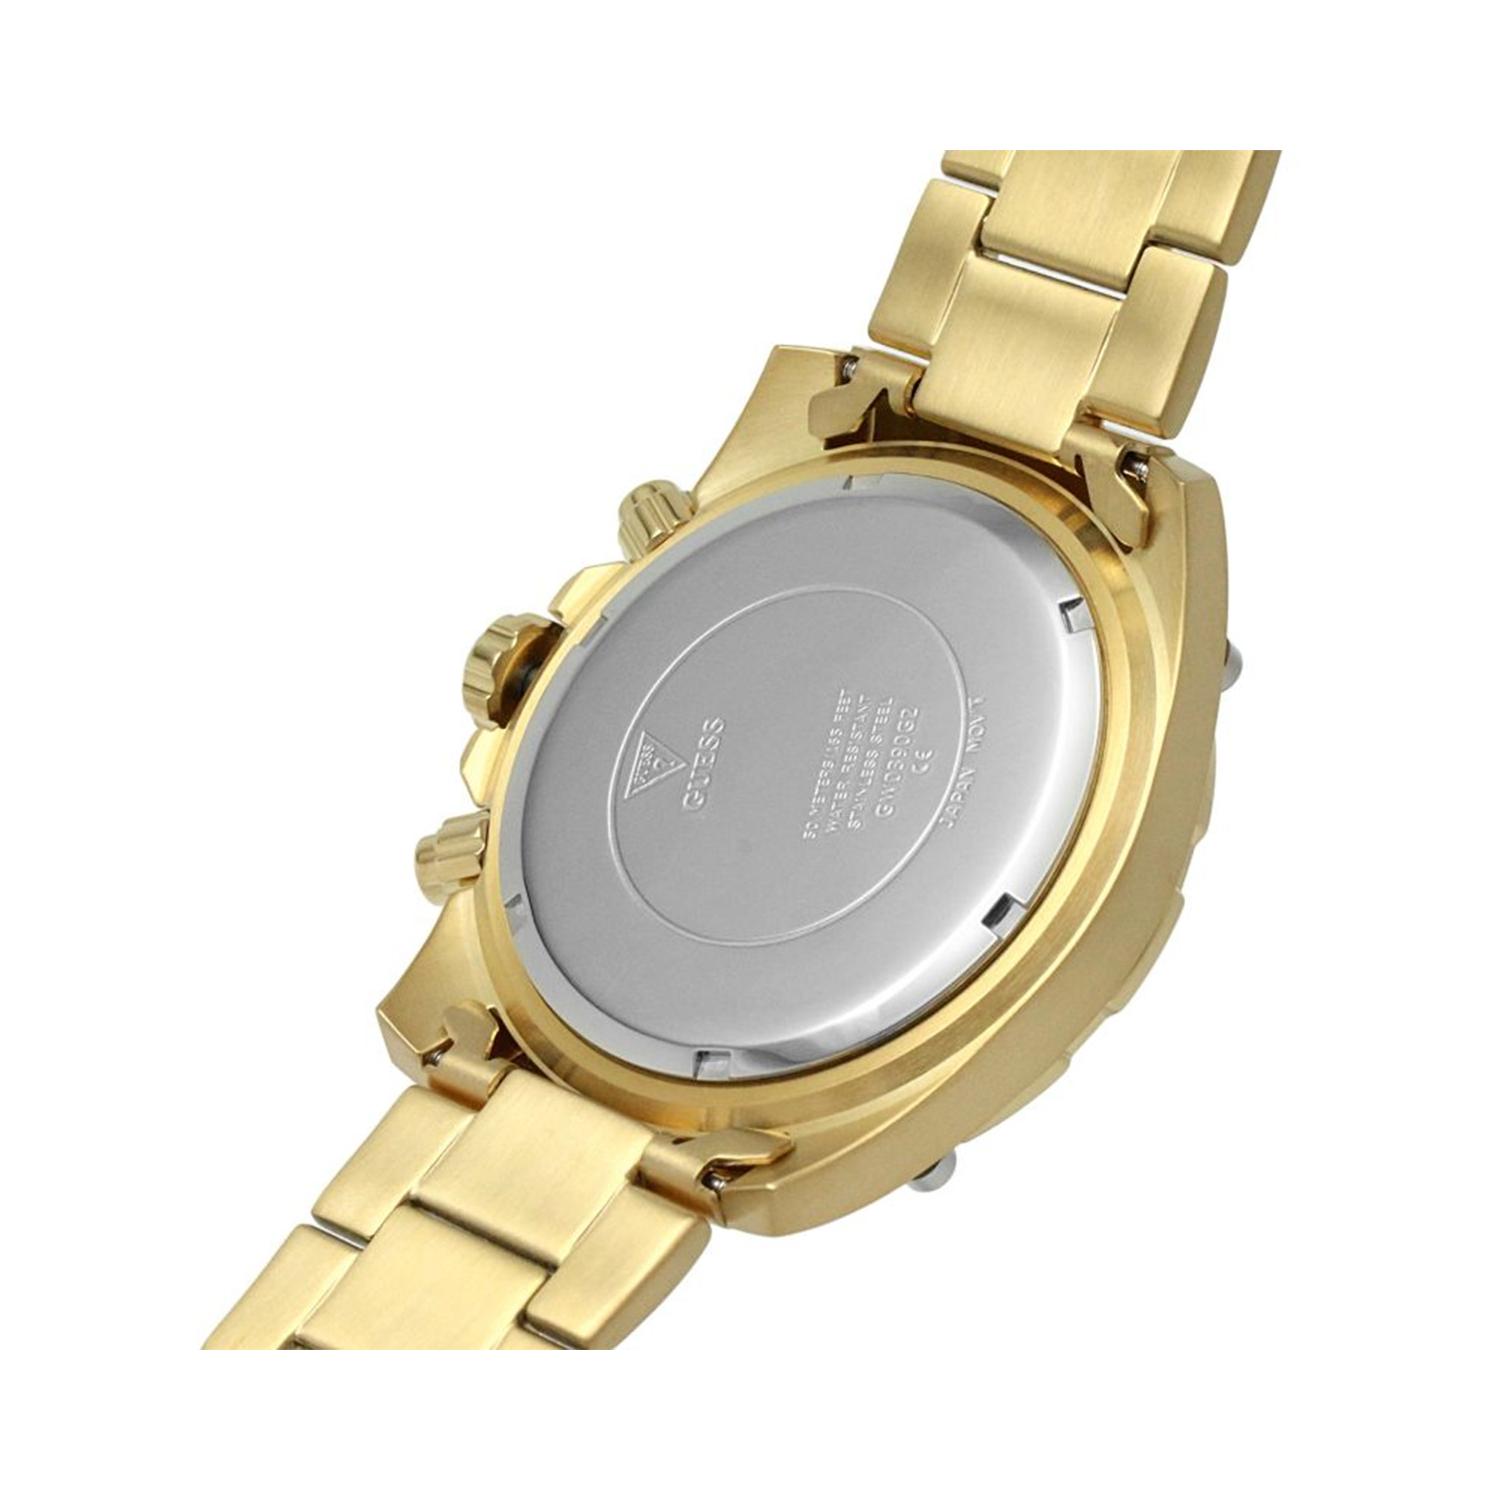 Guess Trophy GW0390G2 Watch | Glasses Station